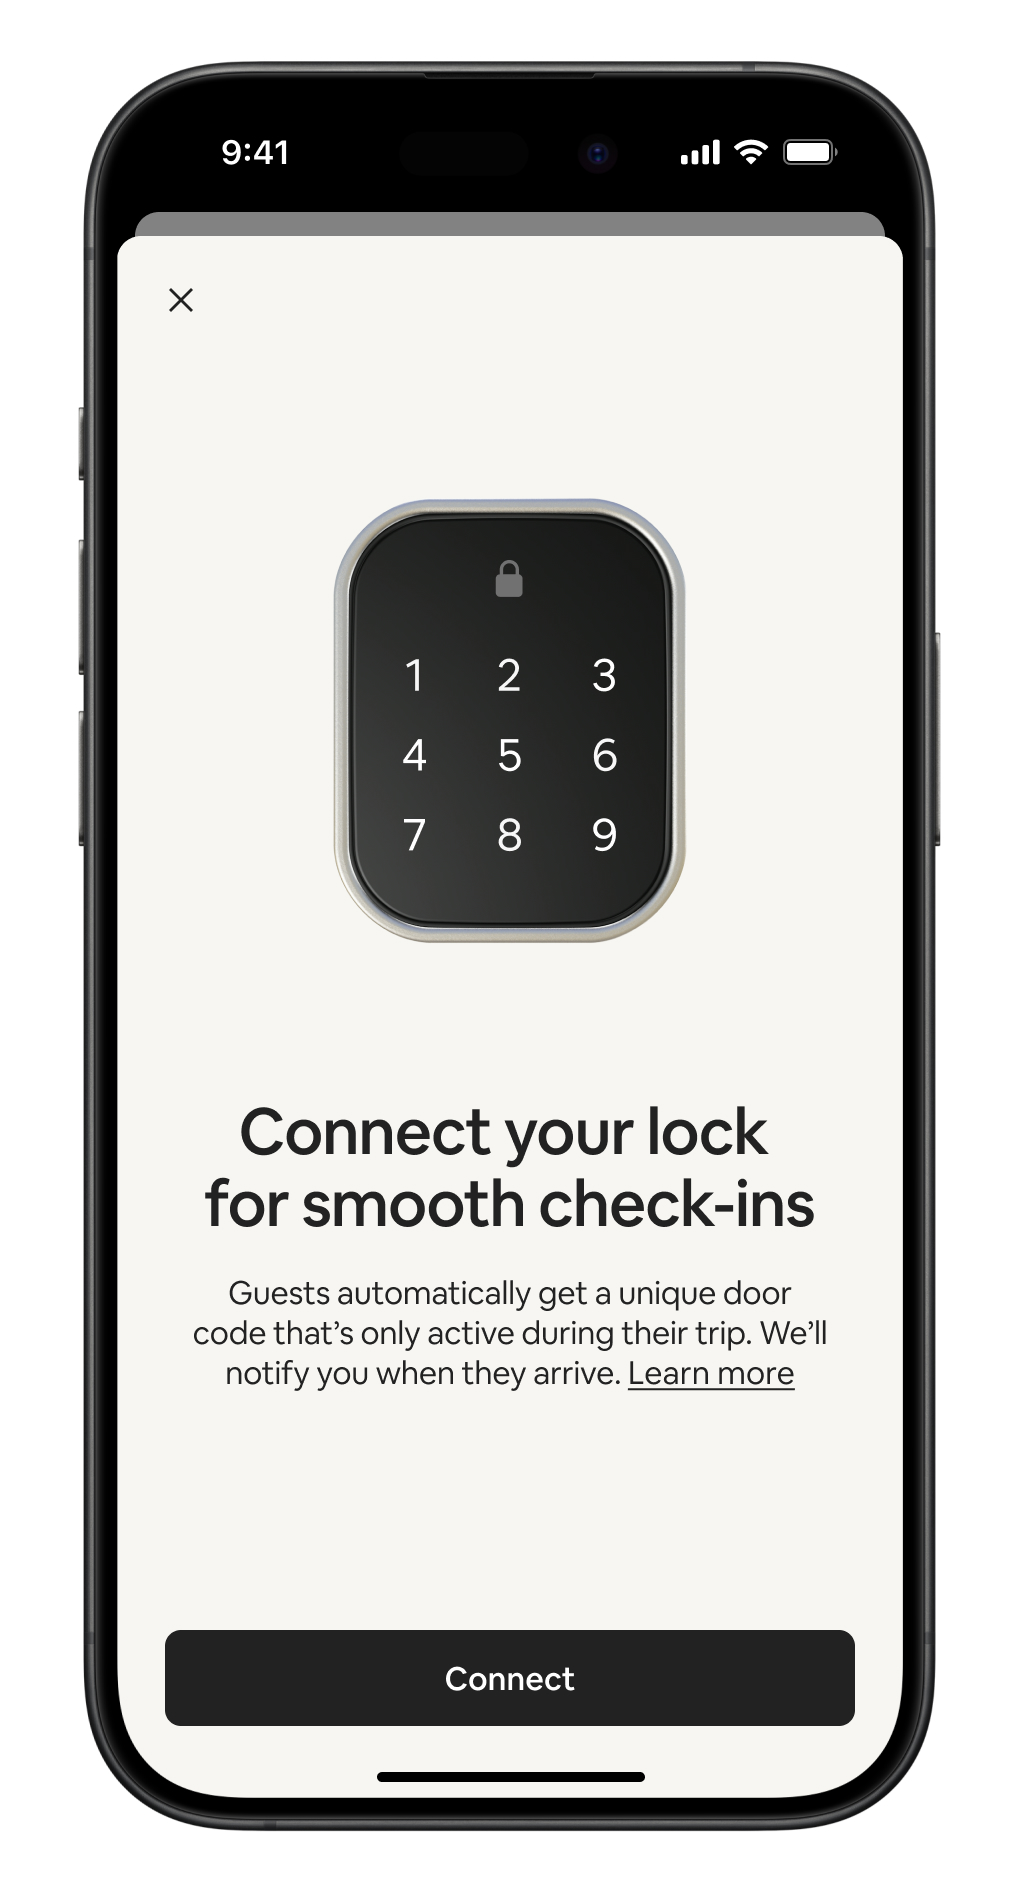 Phone screen with lock pad screenshot inviting users to connect their lock for smooth check ins.